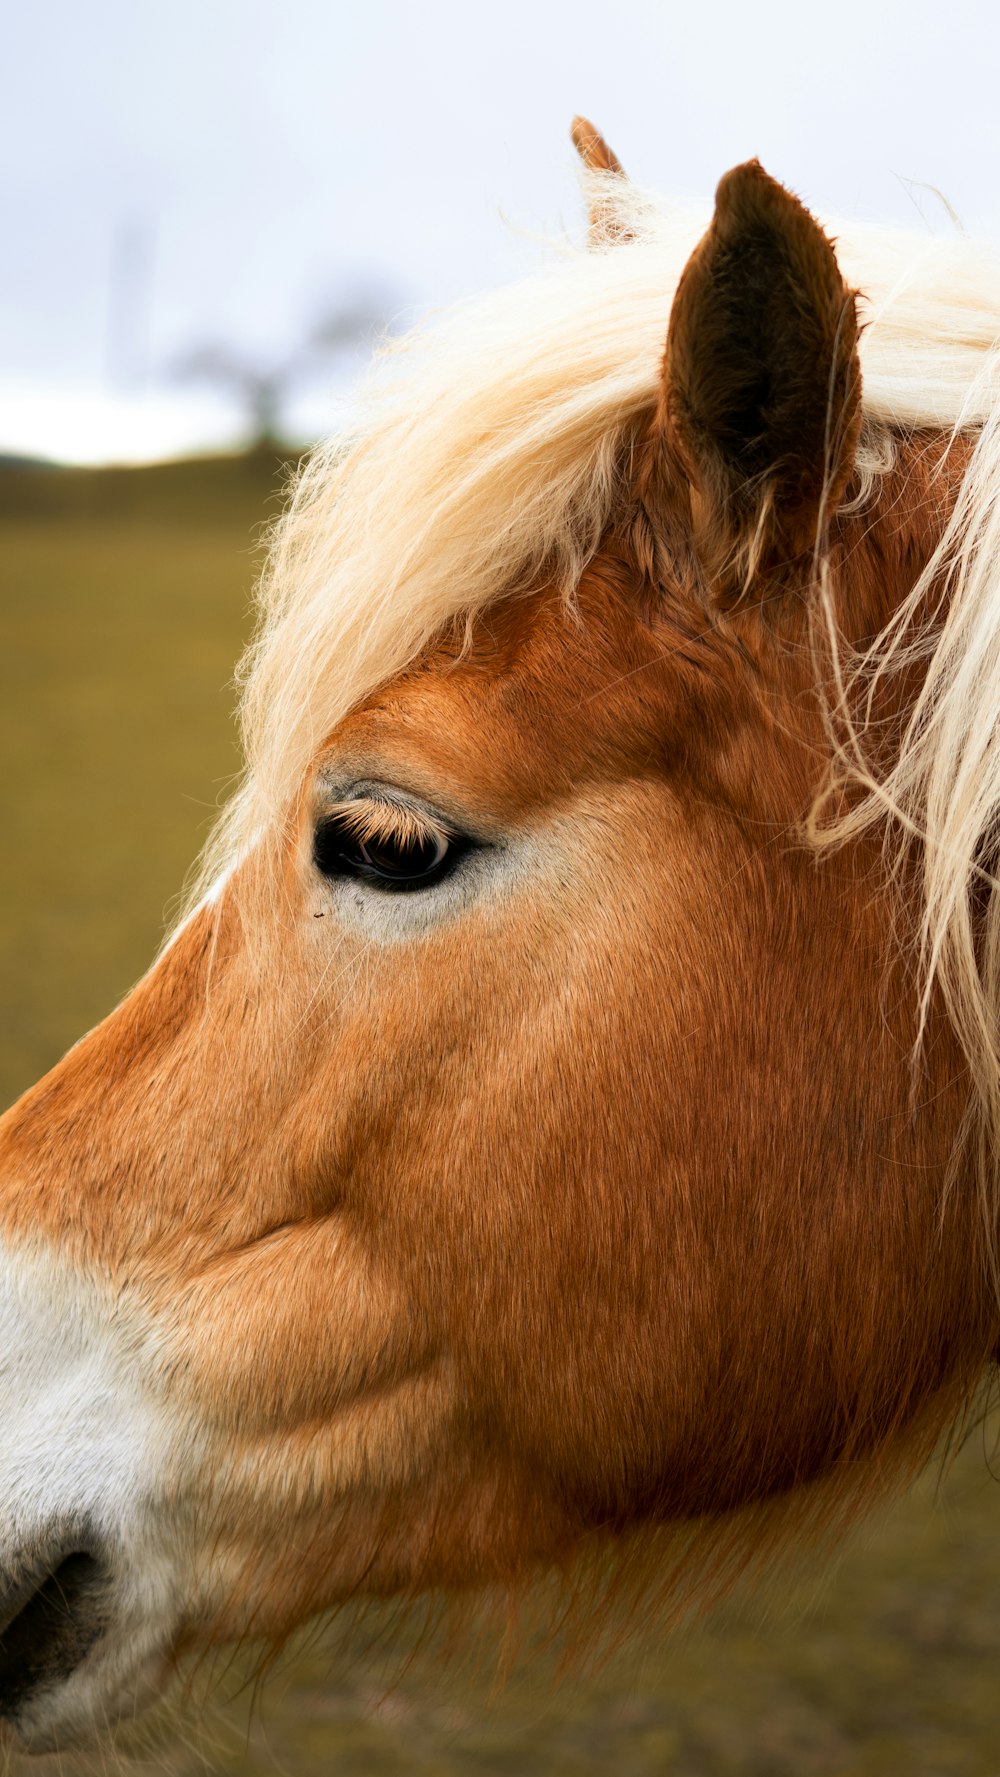 a close up of a brown and white horse